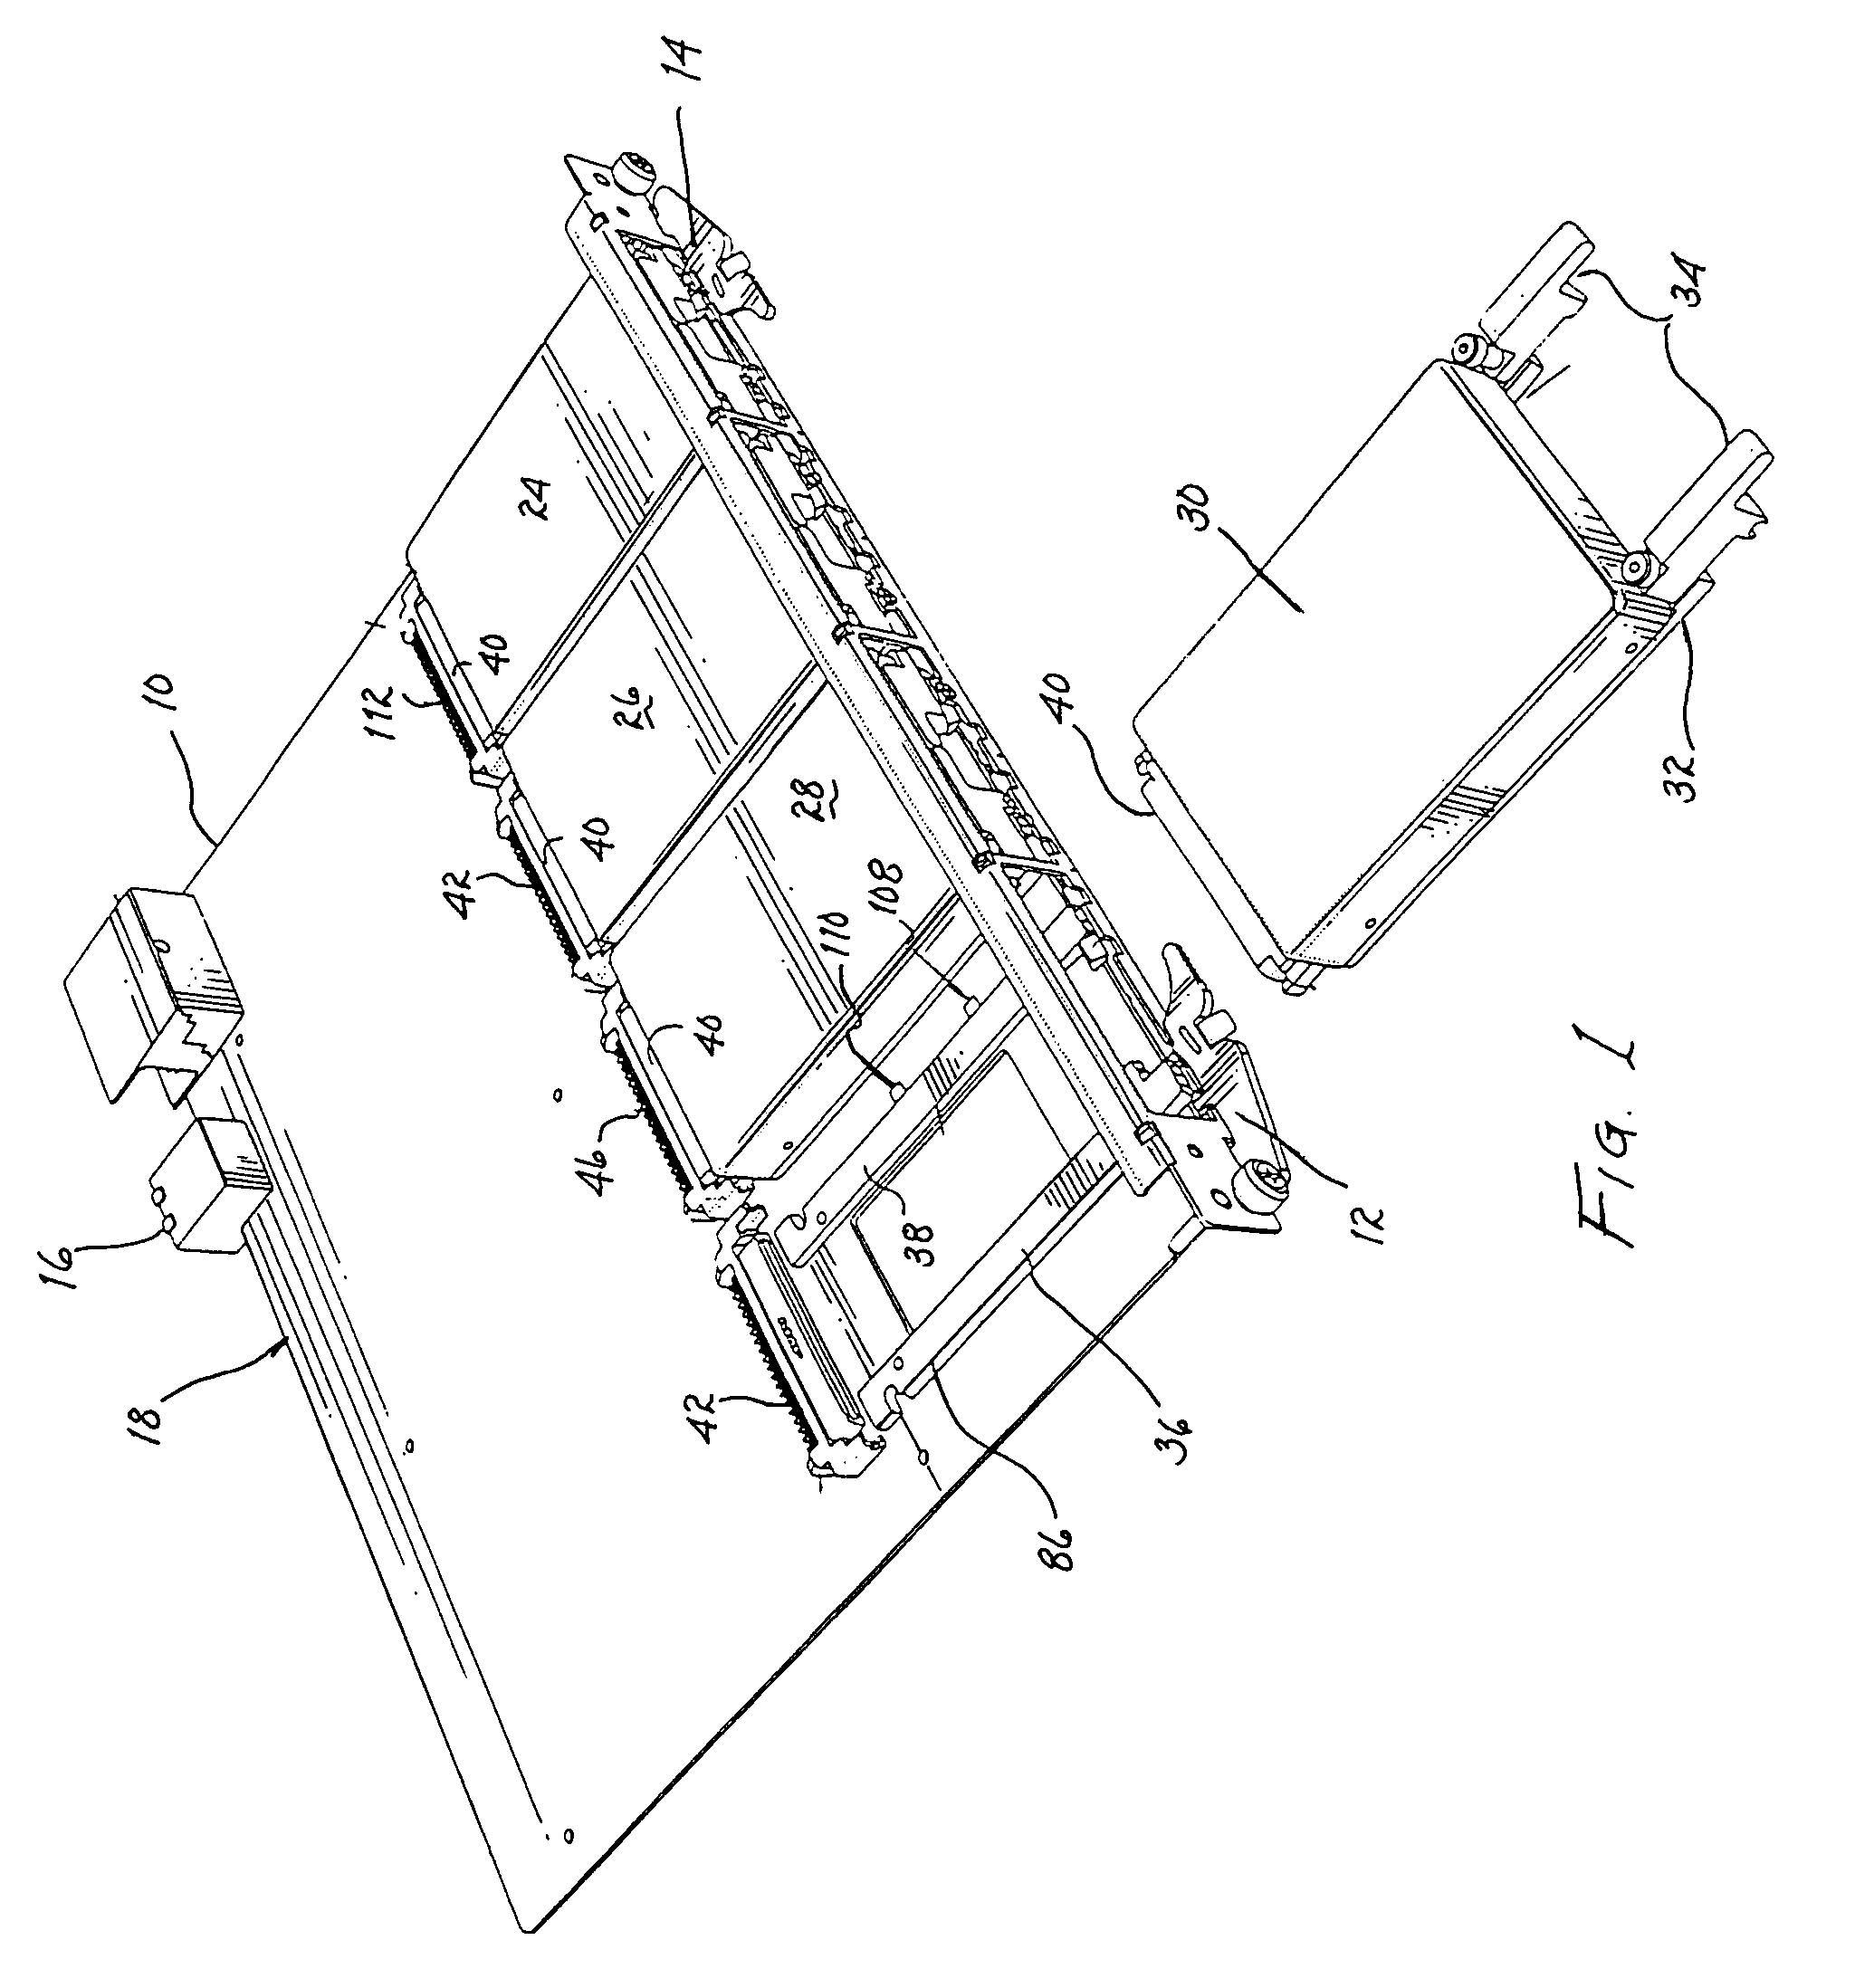 Apparatus for inserting, retaining and extracting a device from a compartment